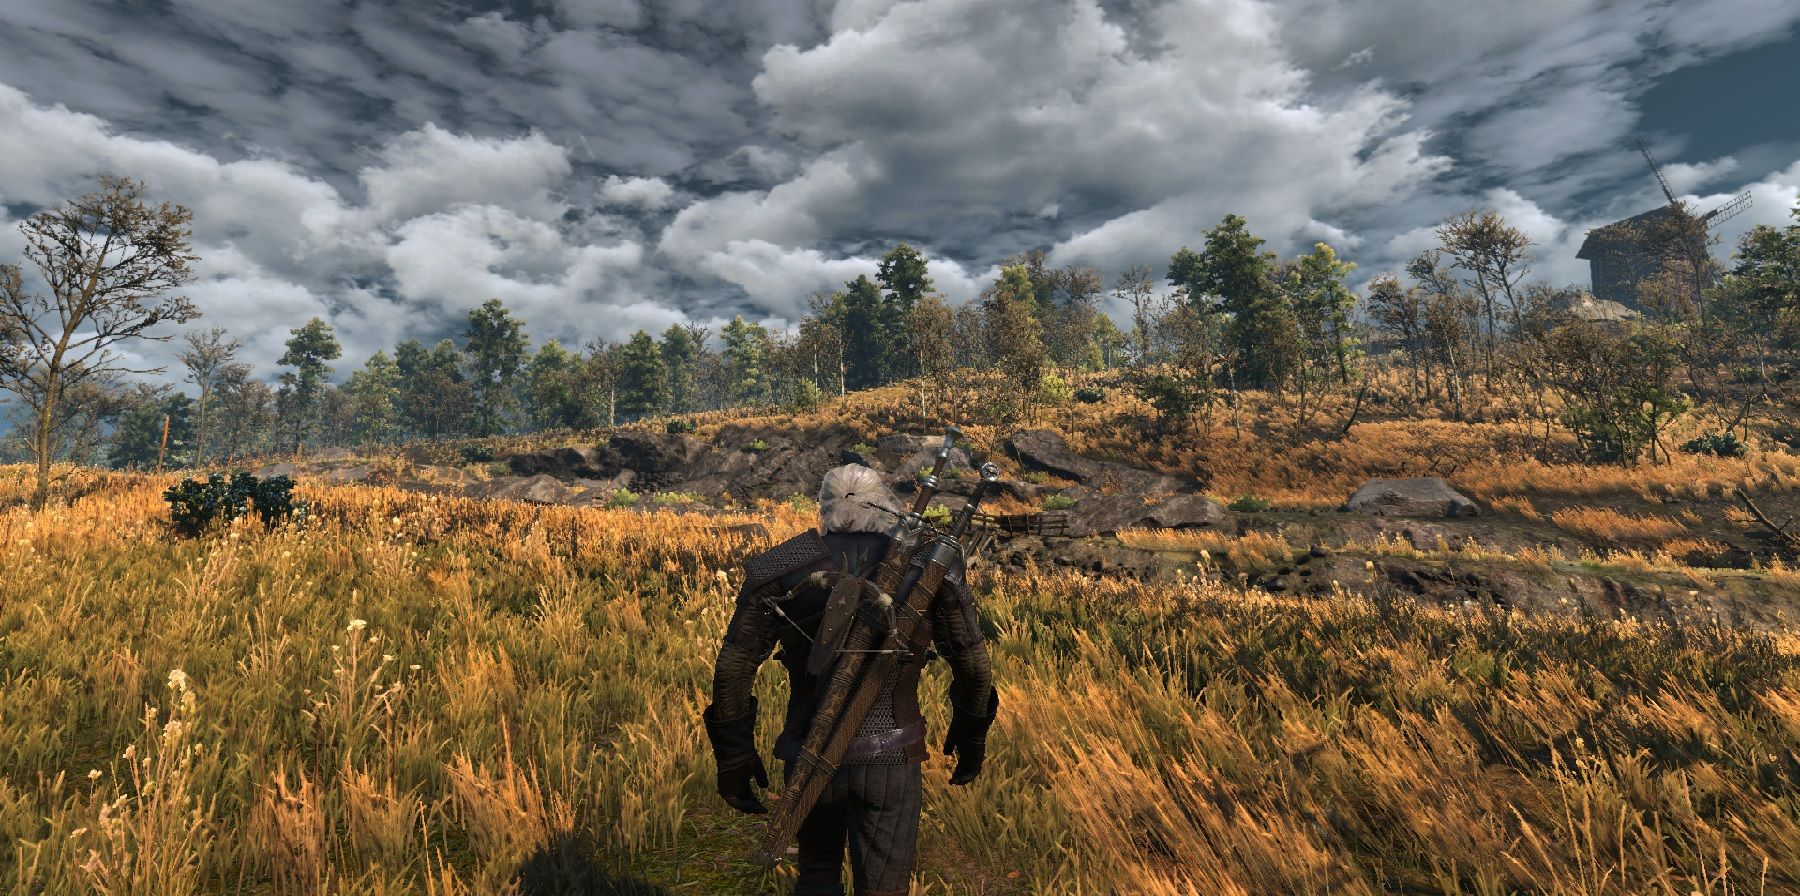 The Witcher 3 Video Shows Geralt Walking Across All the Regions in the Game